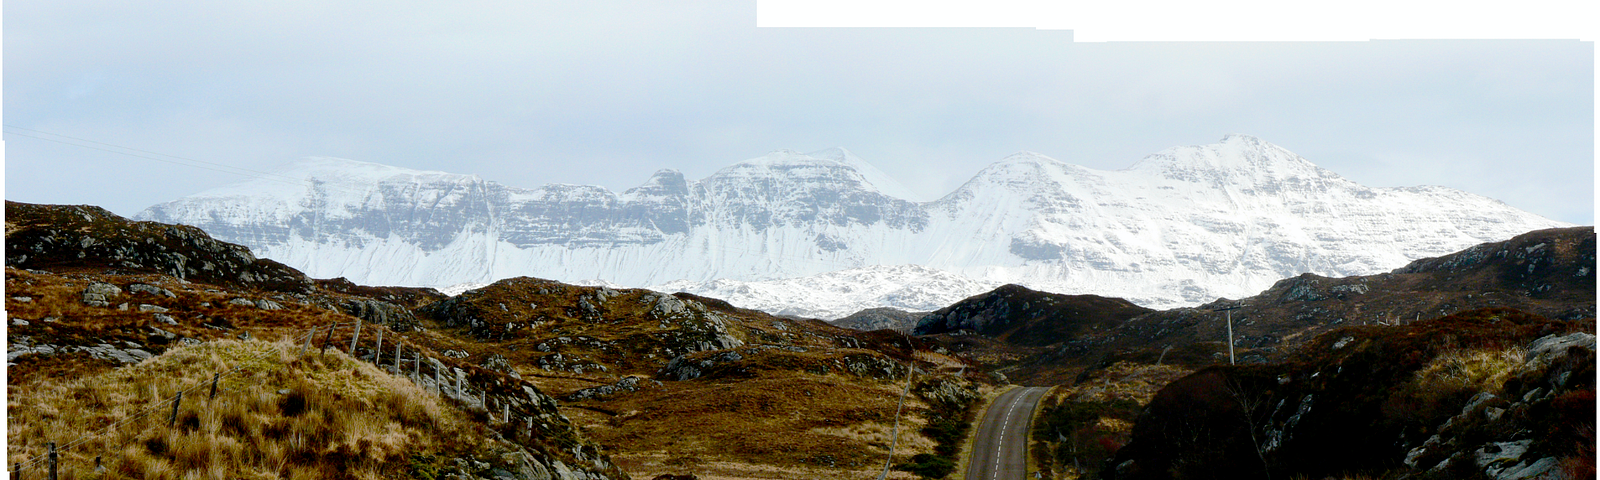 A panorama of a road receding into a background of snowy mountains